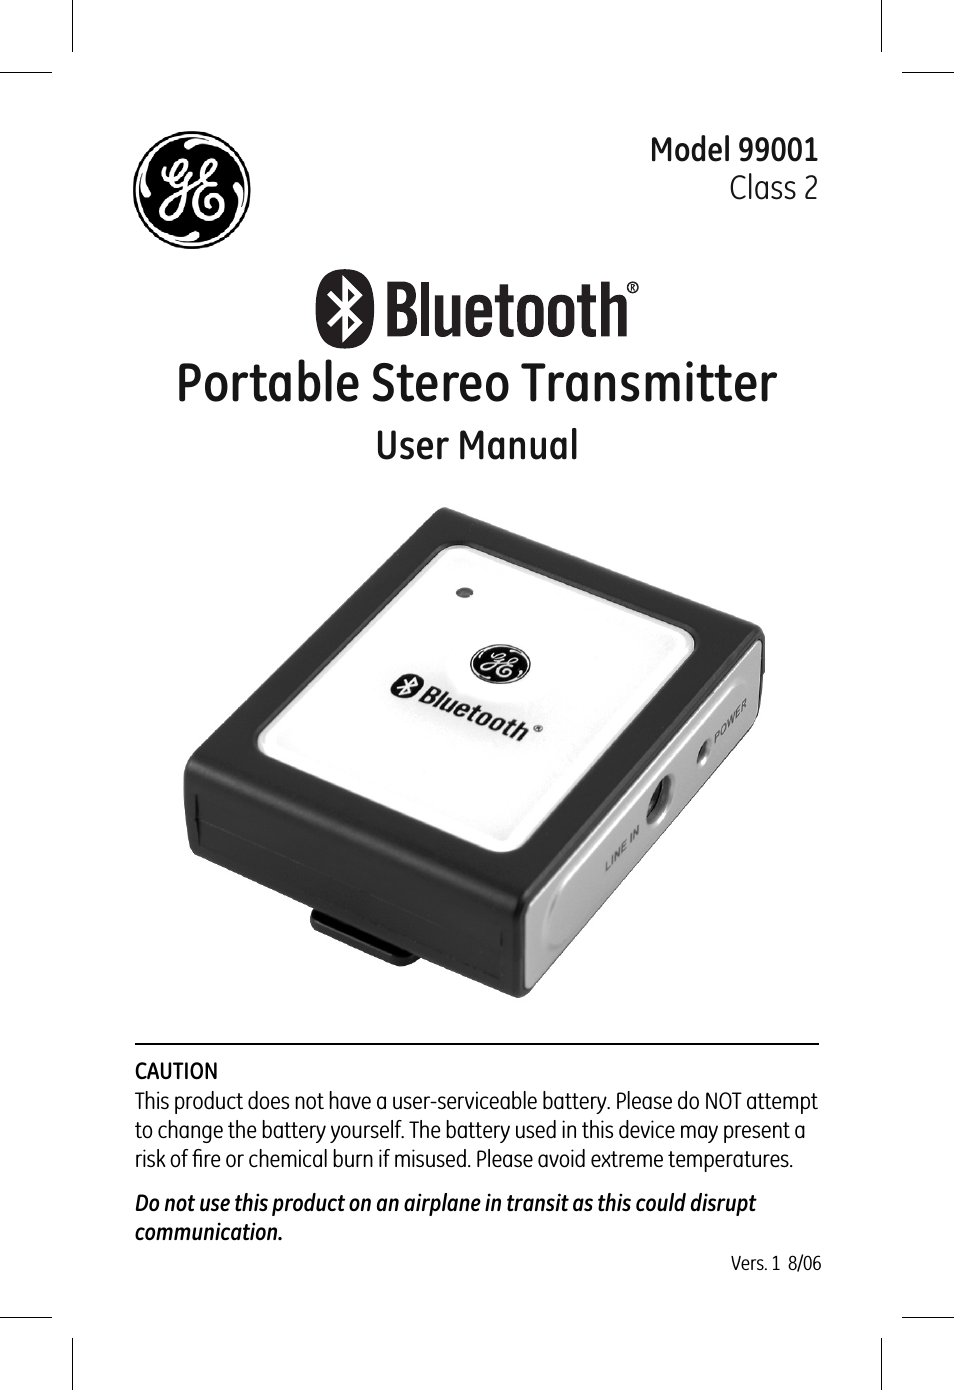 99001 GE Bluetooth Portable Stereo Transmitter